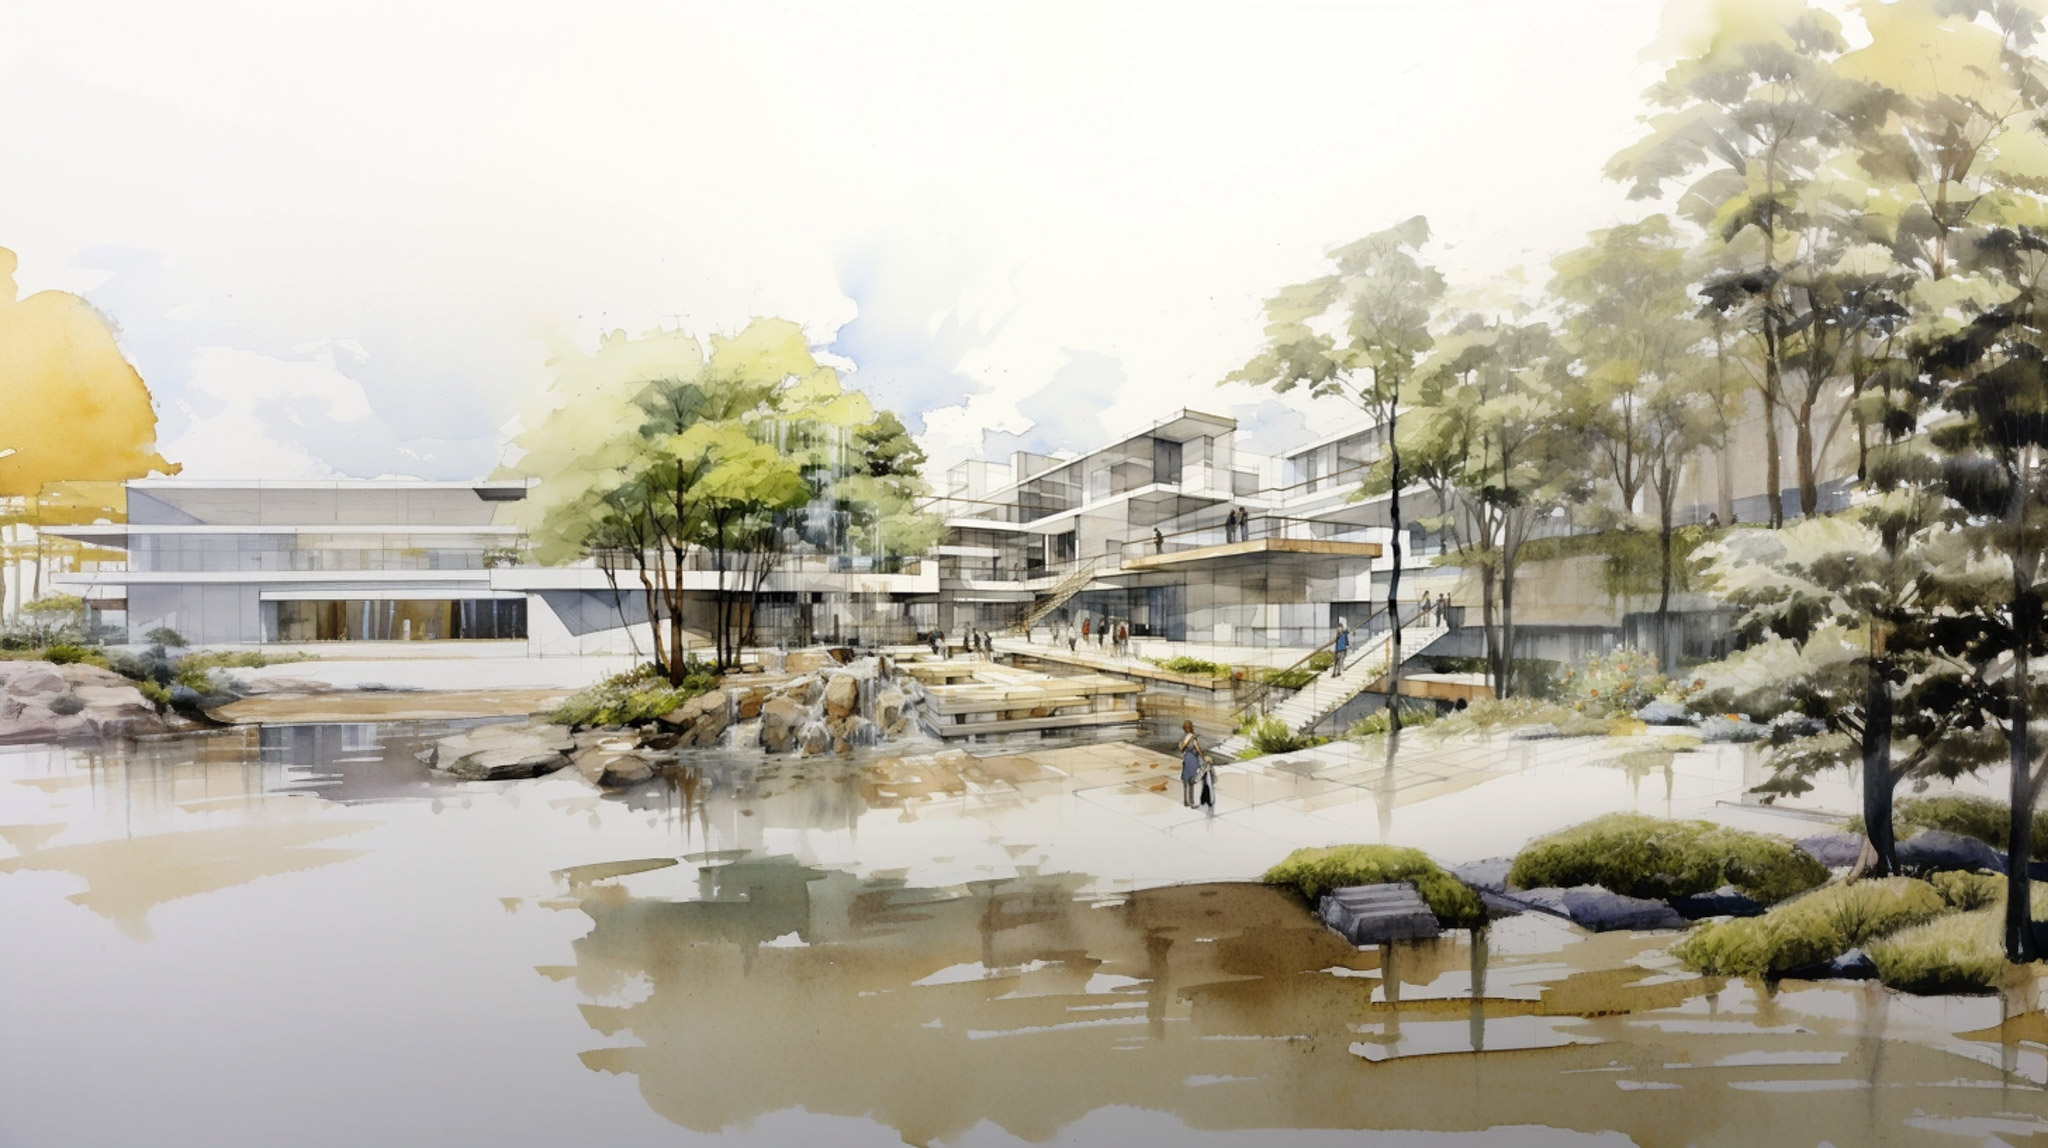 A modern minimalist low rise multi-level mixed use development surrounded by trees and water features.